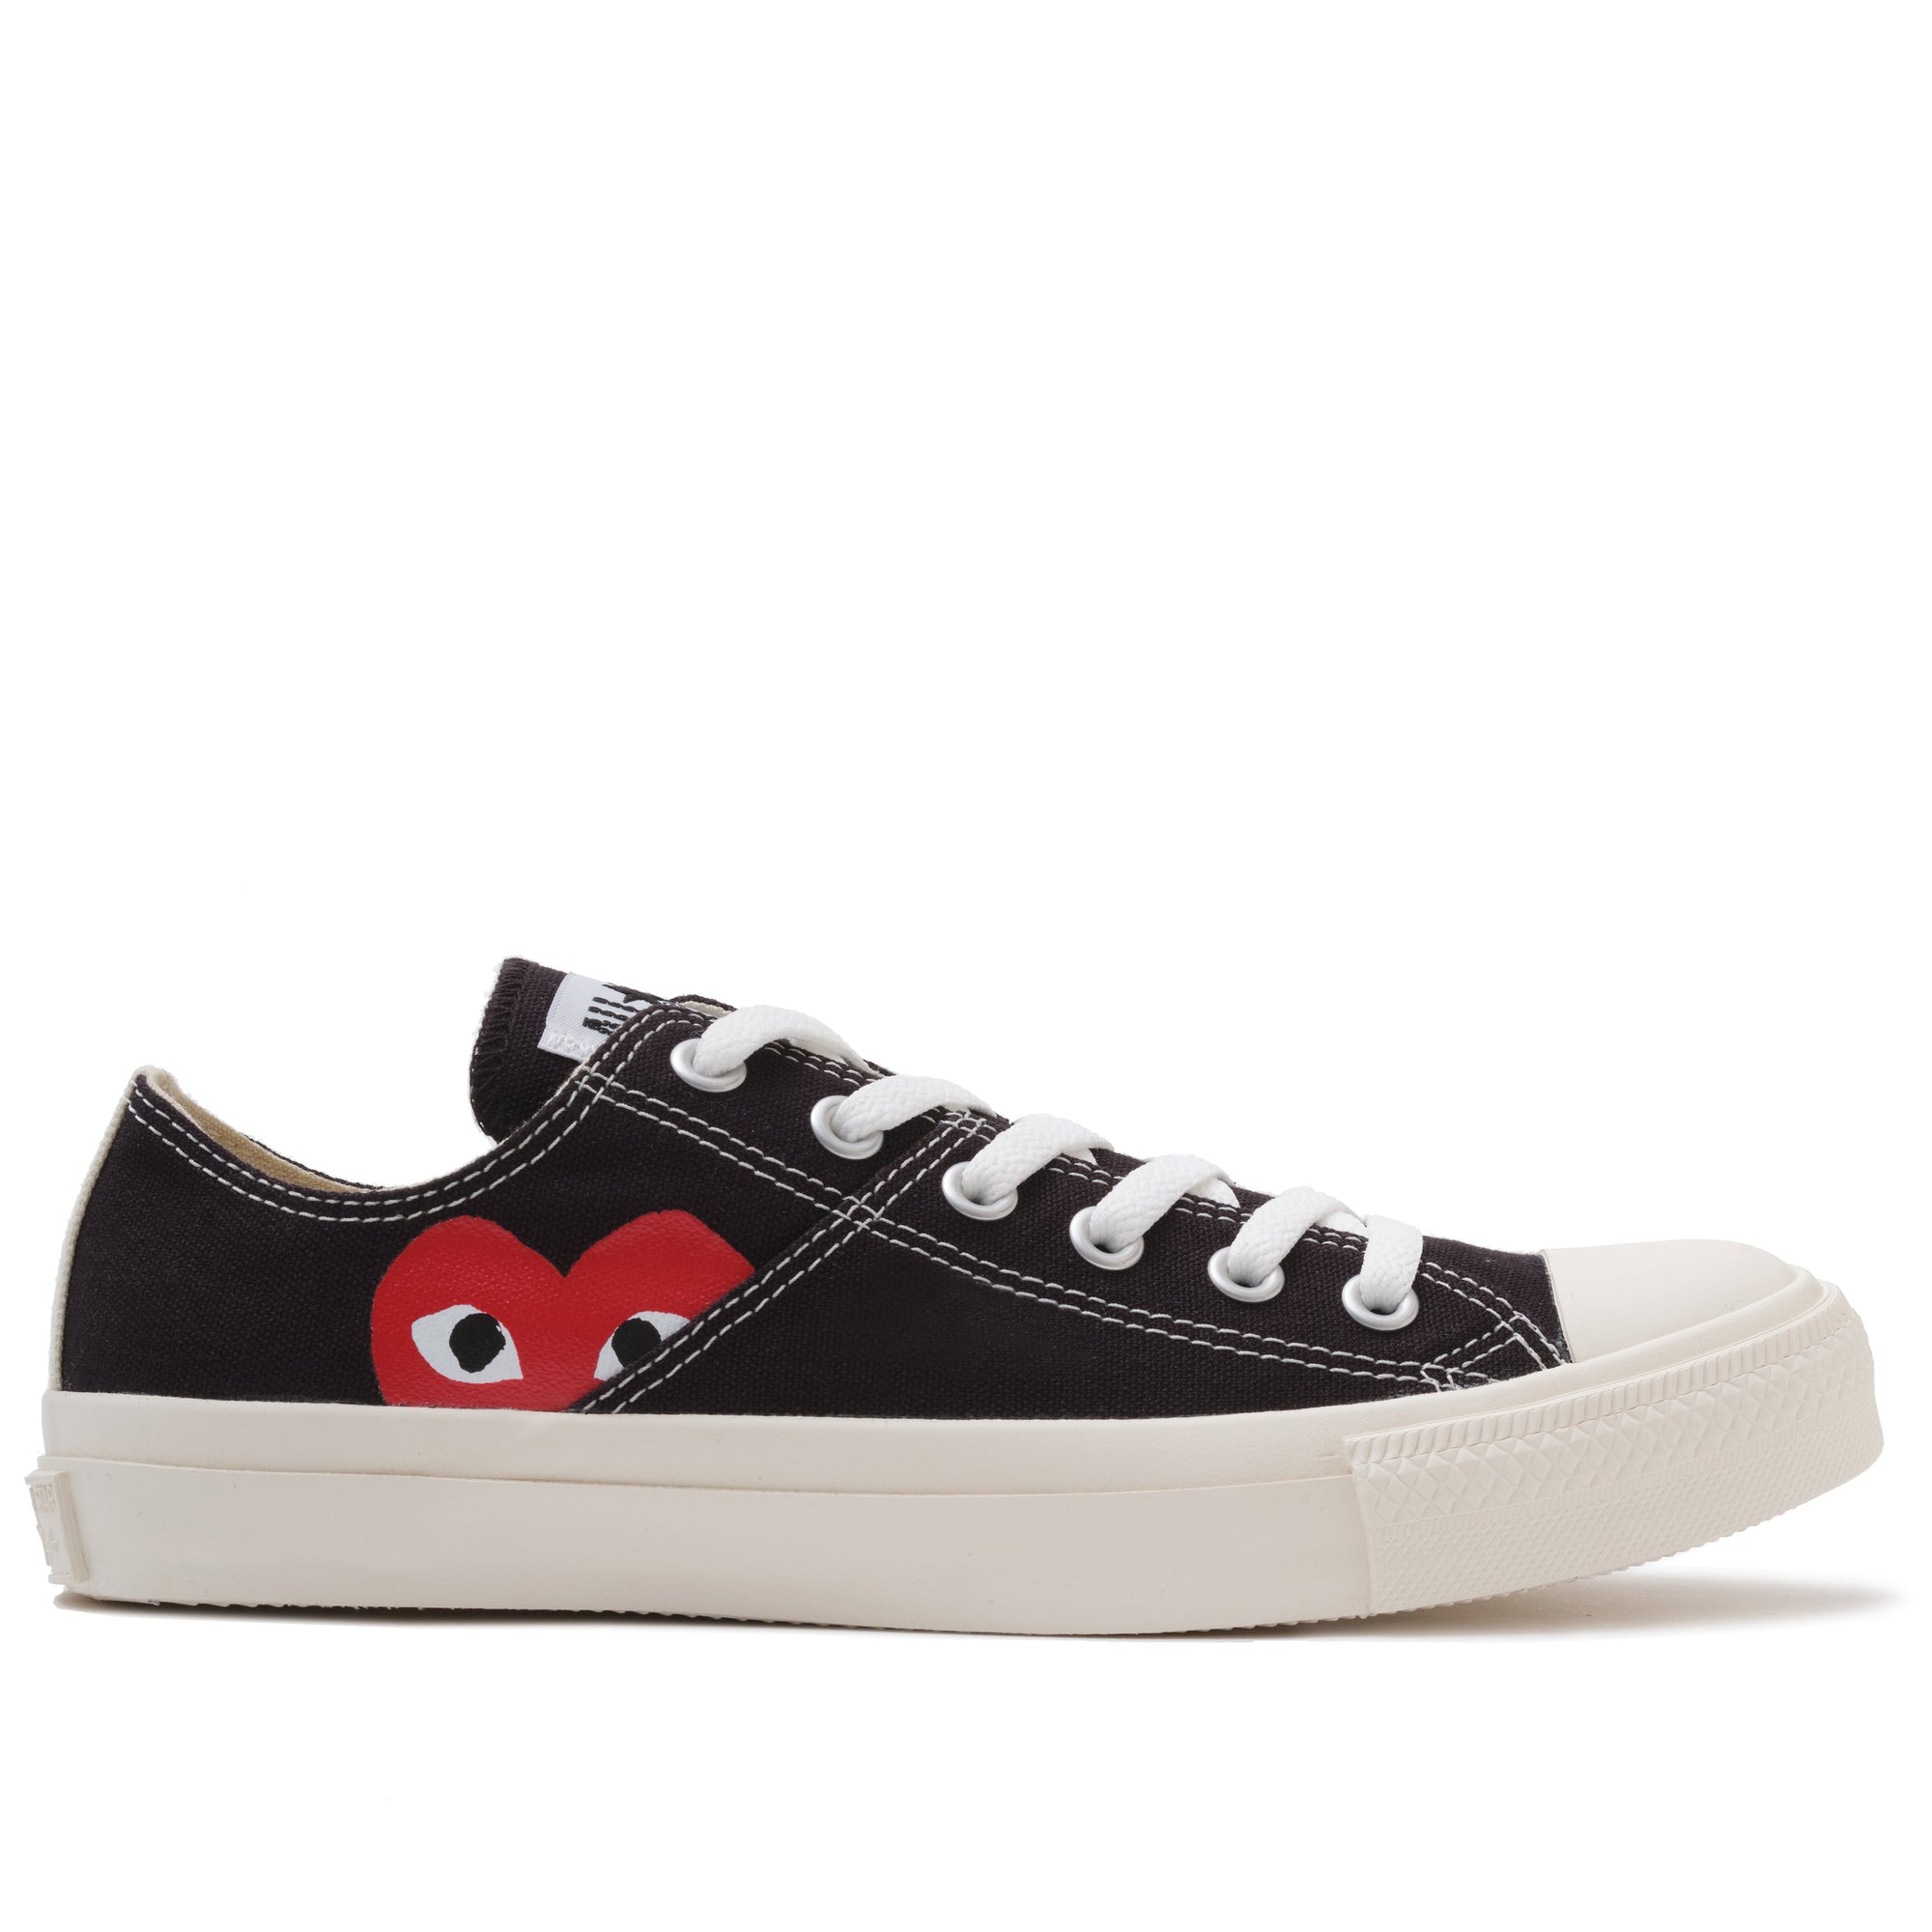 PLAY CDG CONVERSE - ALL STAR LOW - (BLACK) view 1